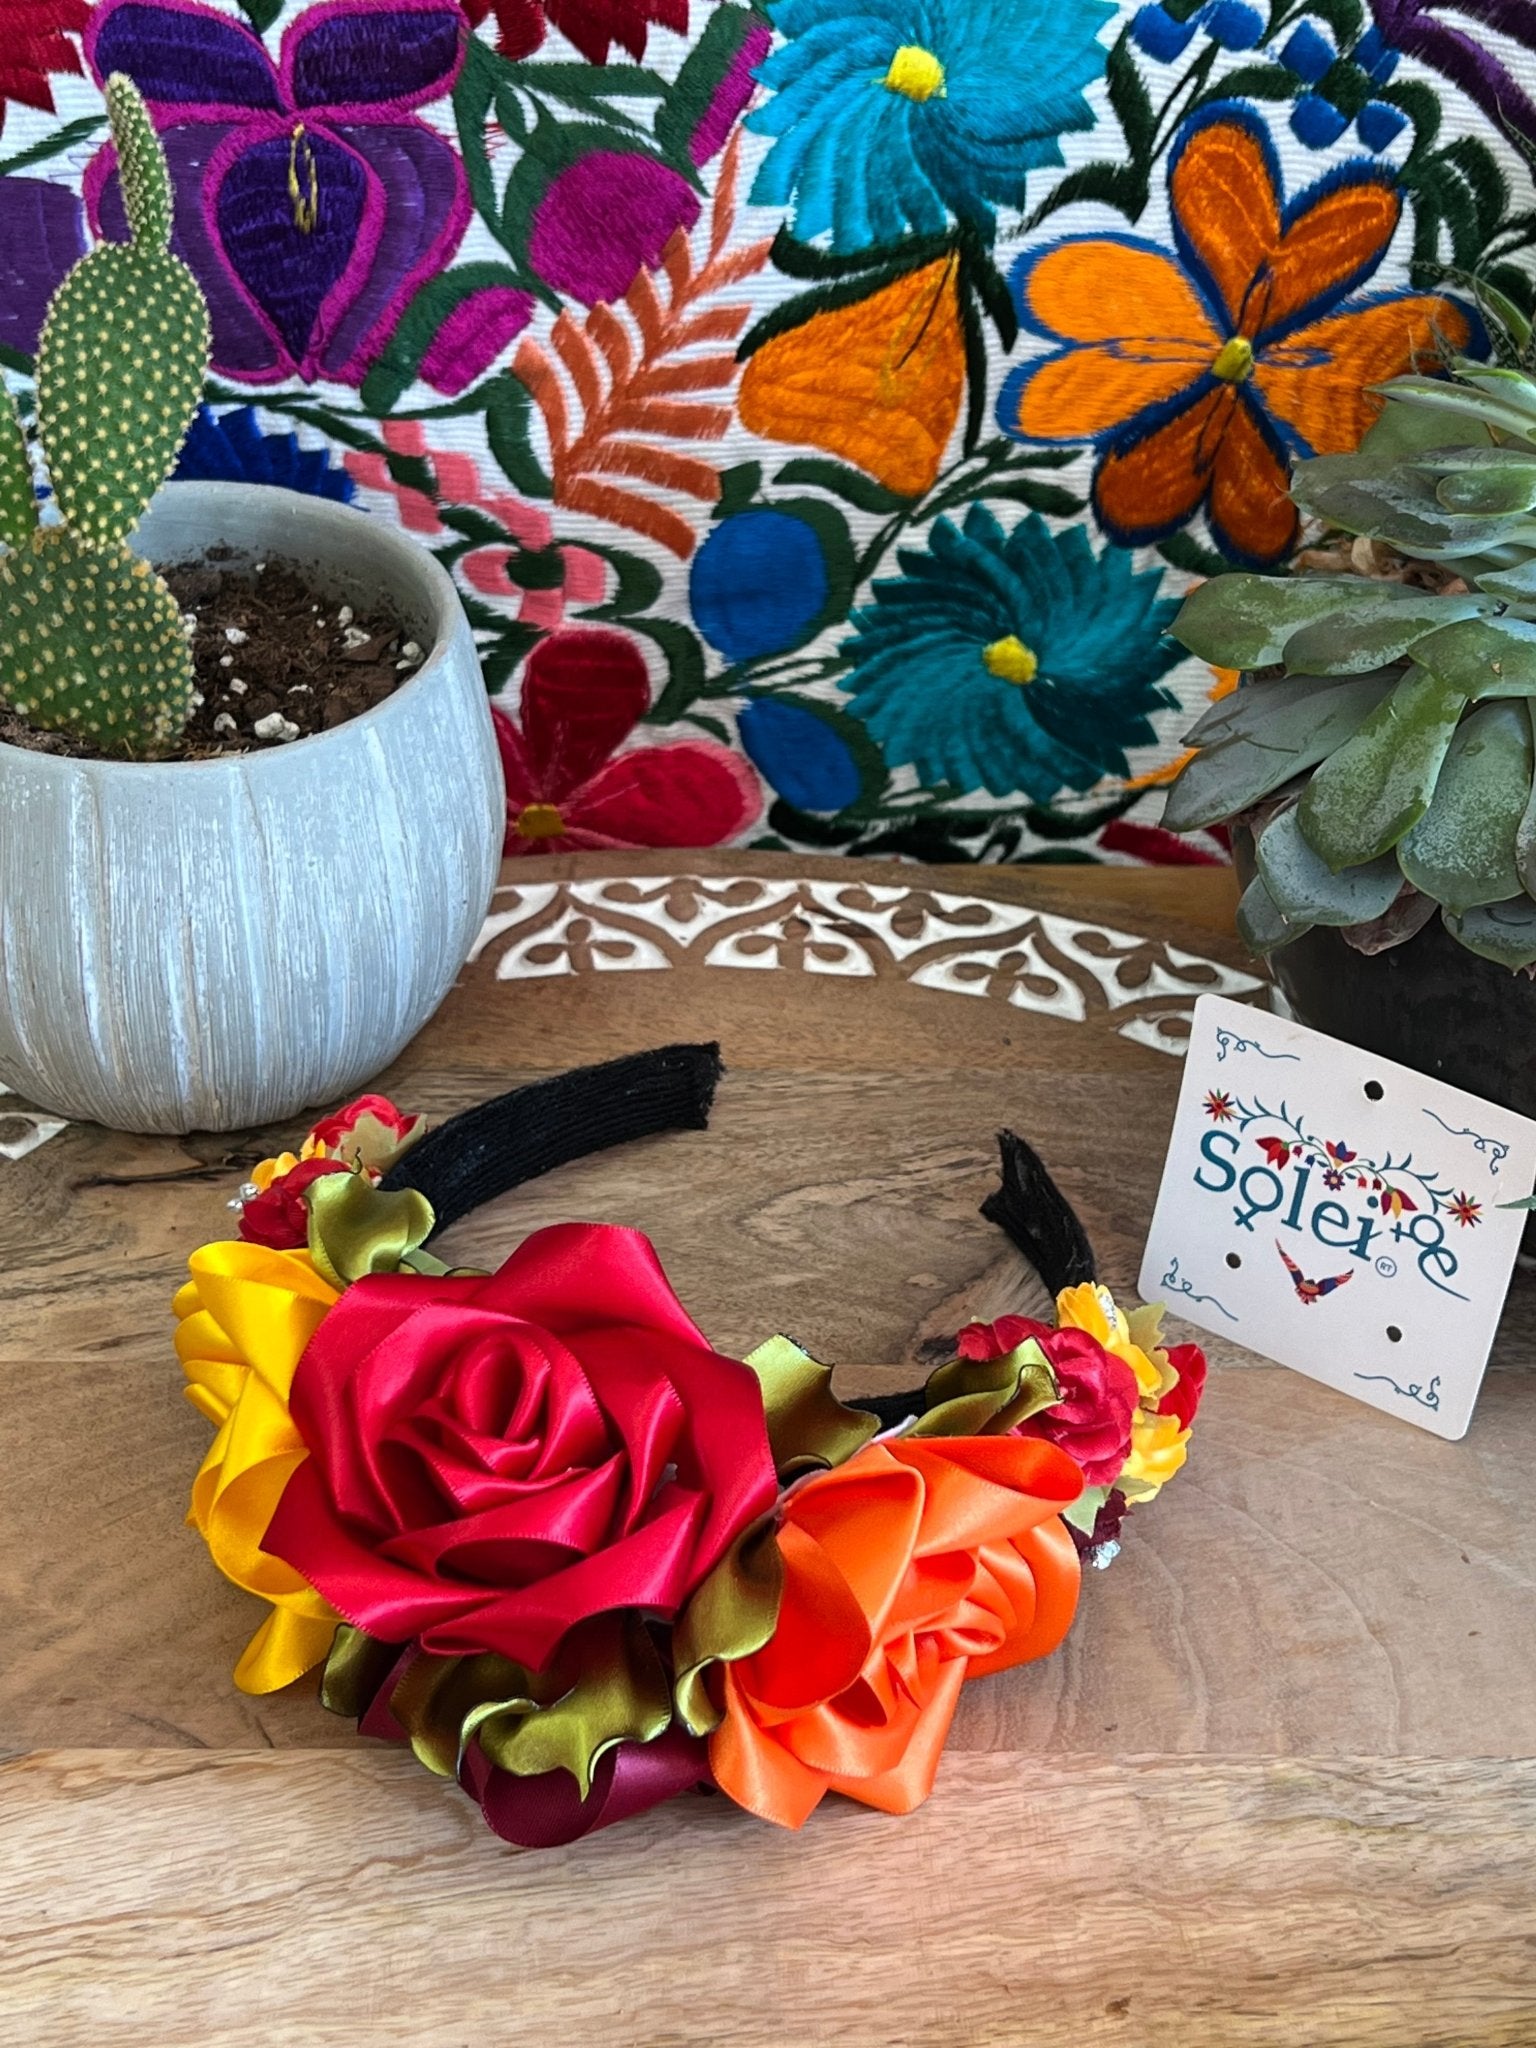 Traditional Mexican Floral Headband. Ketzaly Headband. - Solei Store